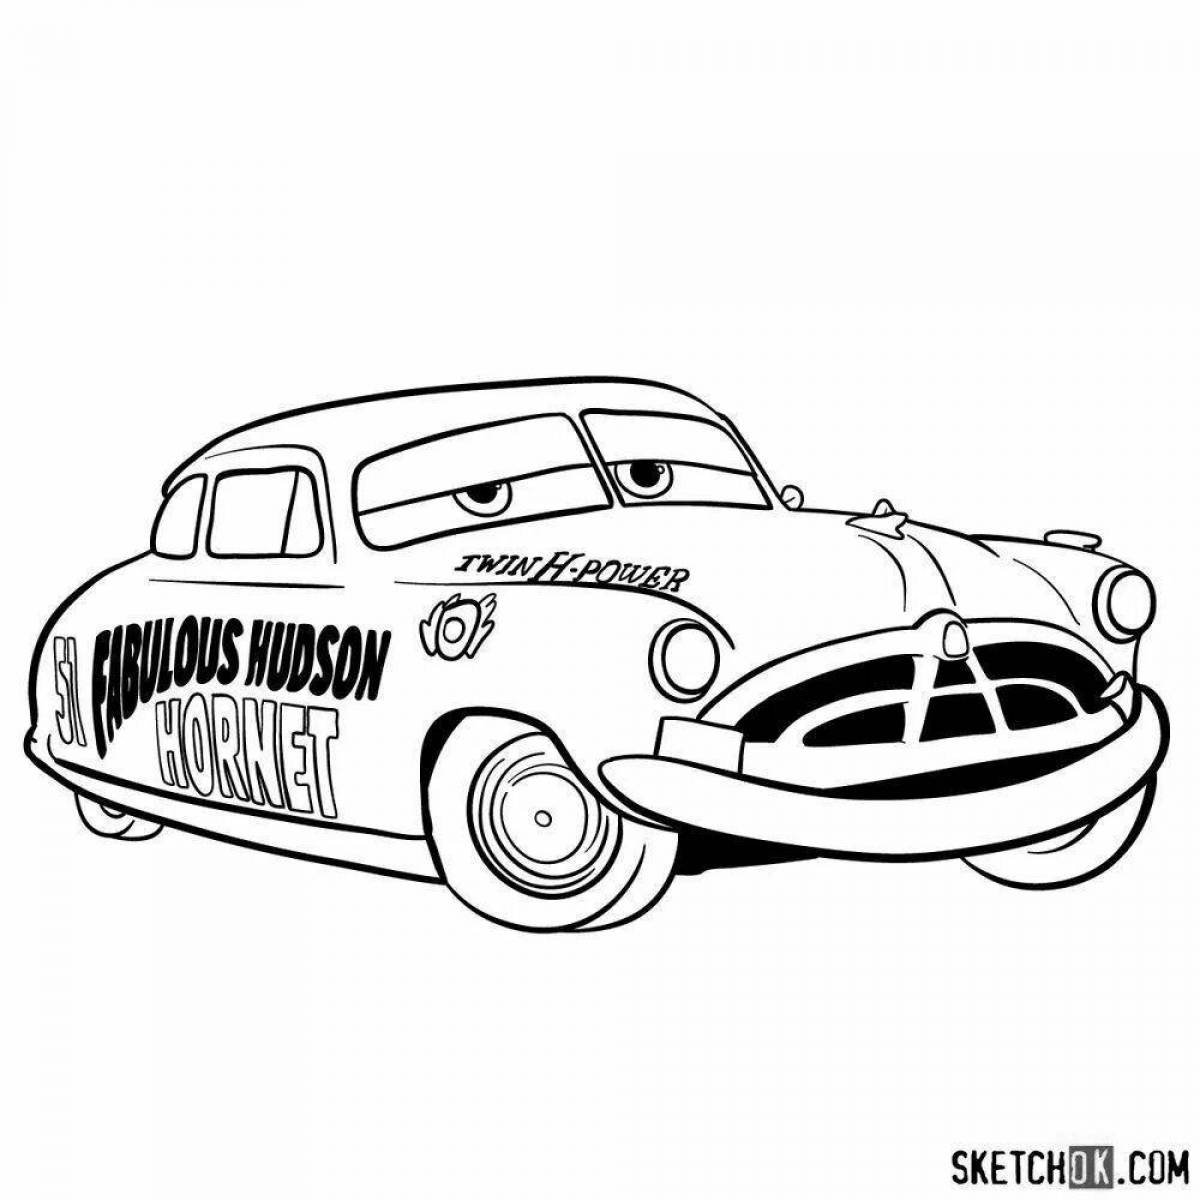 Doc Hudson's Animated Coloring Page